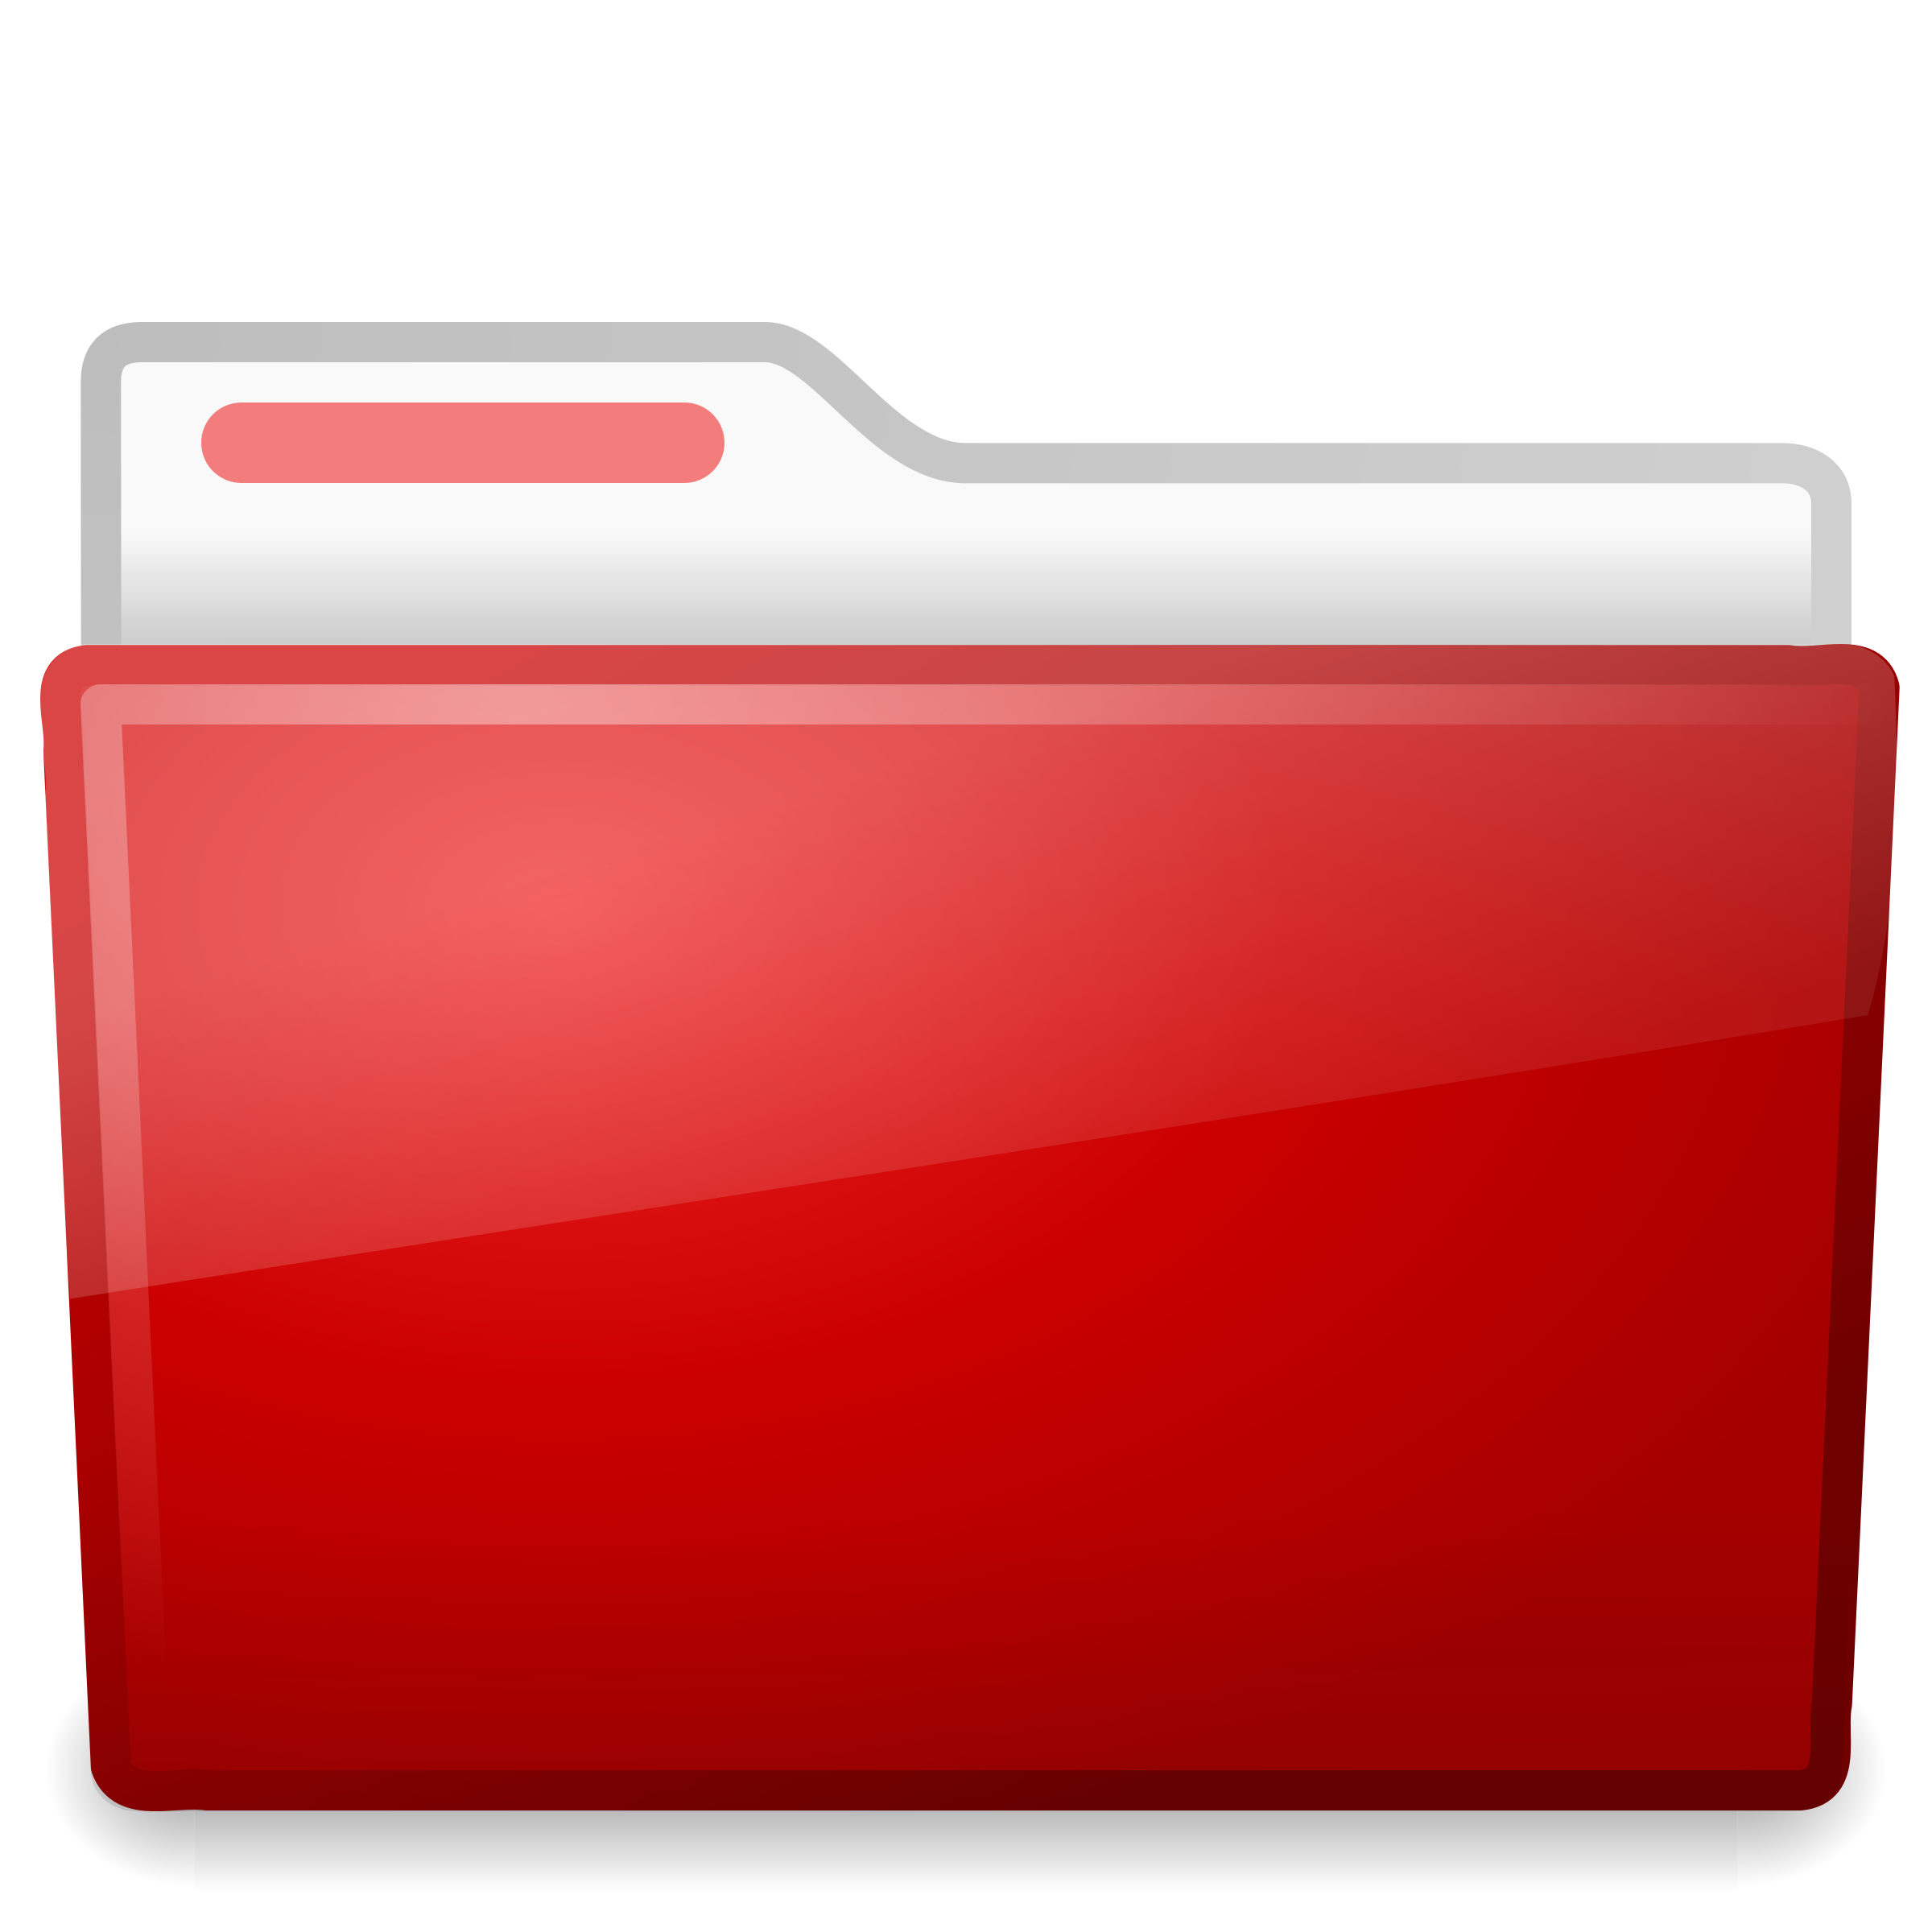 Red File  Folder vector  clipart image Free stock photo 